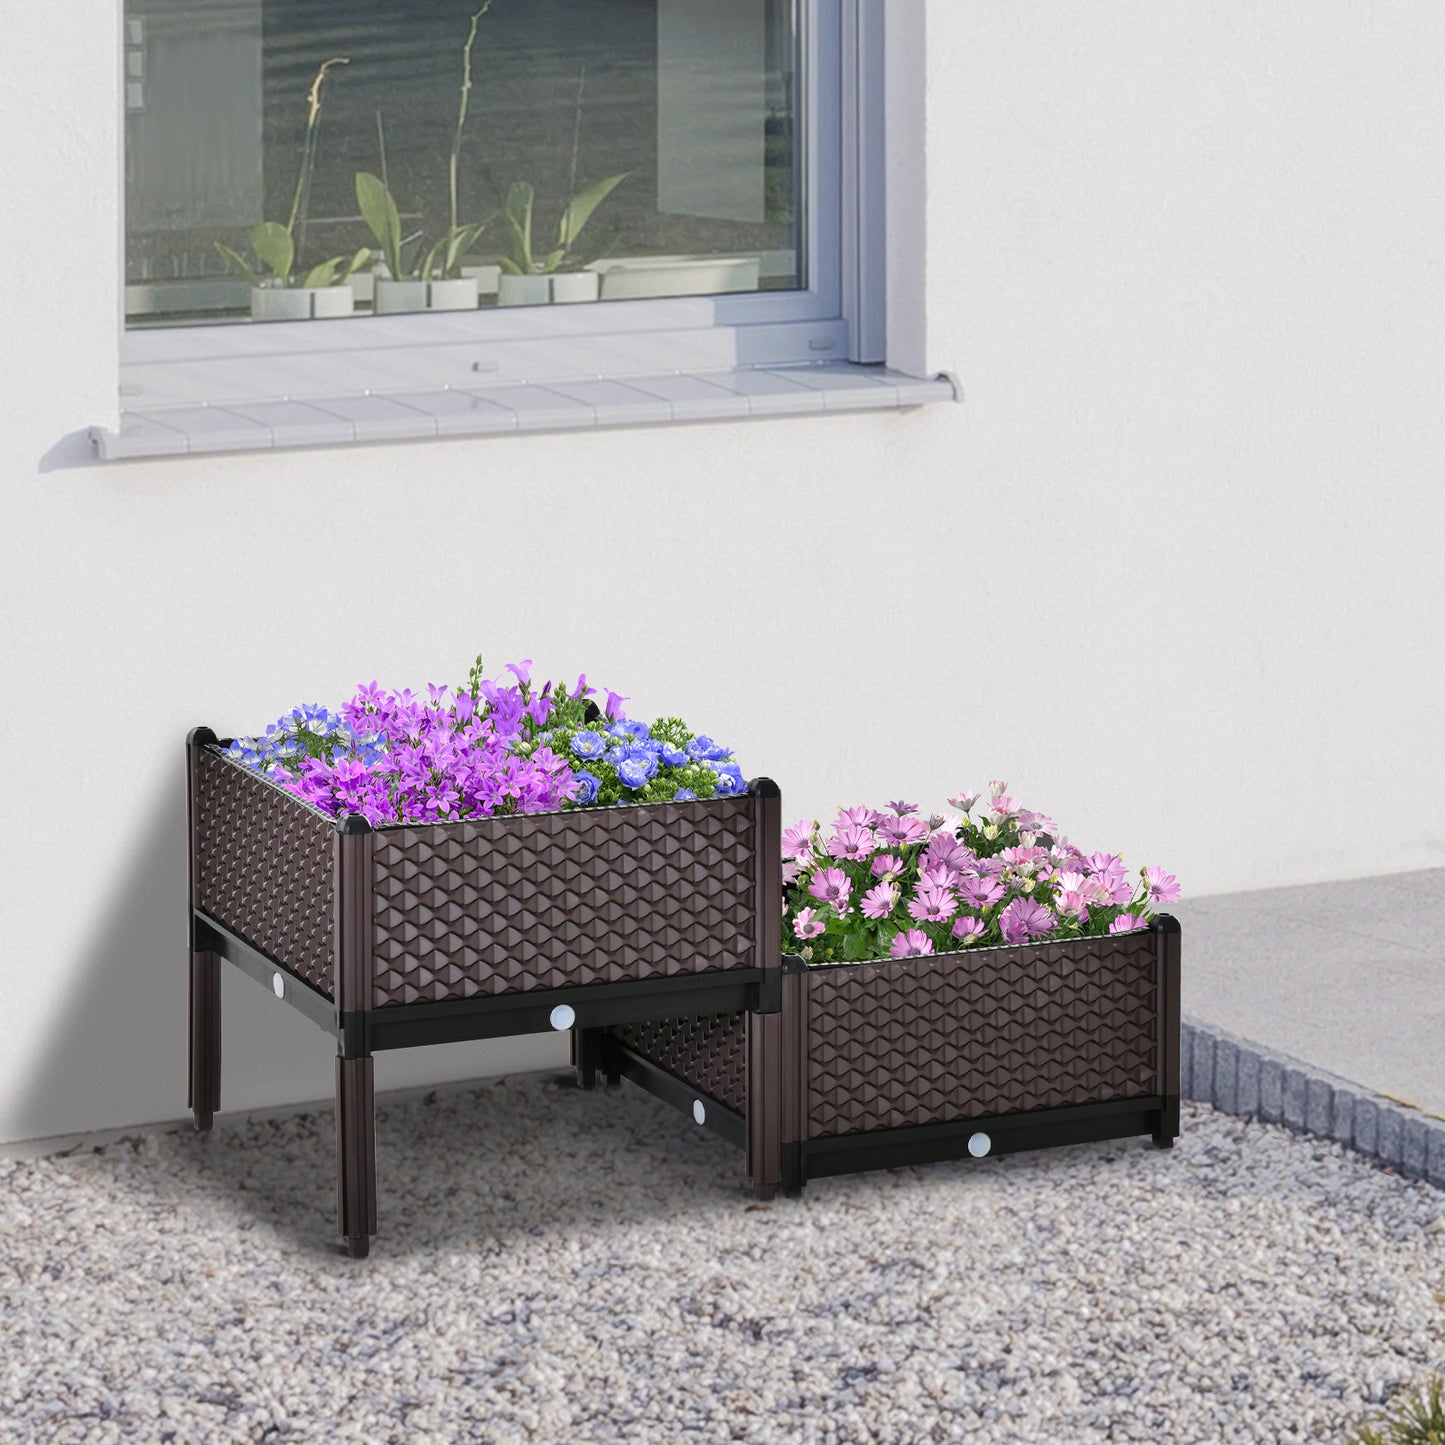 Outsunny 50cm x 50cm x 46.5cm Set of 2 Plastic Raised Garden Bed, Planter Box, Flower Vegetables Planting Container with Self-Watering Design